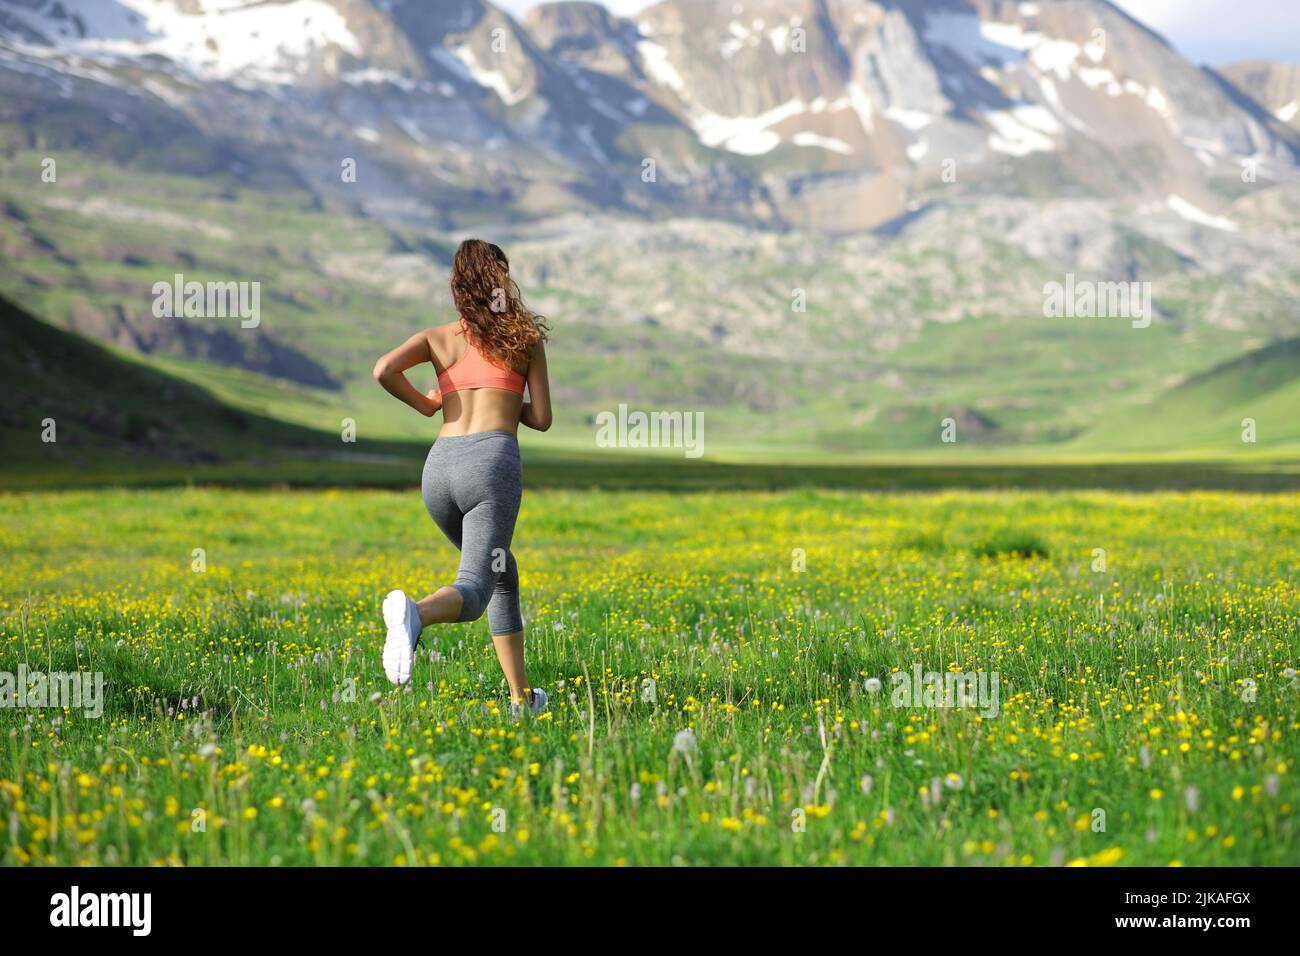 Back view full body portrait of a runner woman running in a field in the high mountain Stock Photo